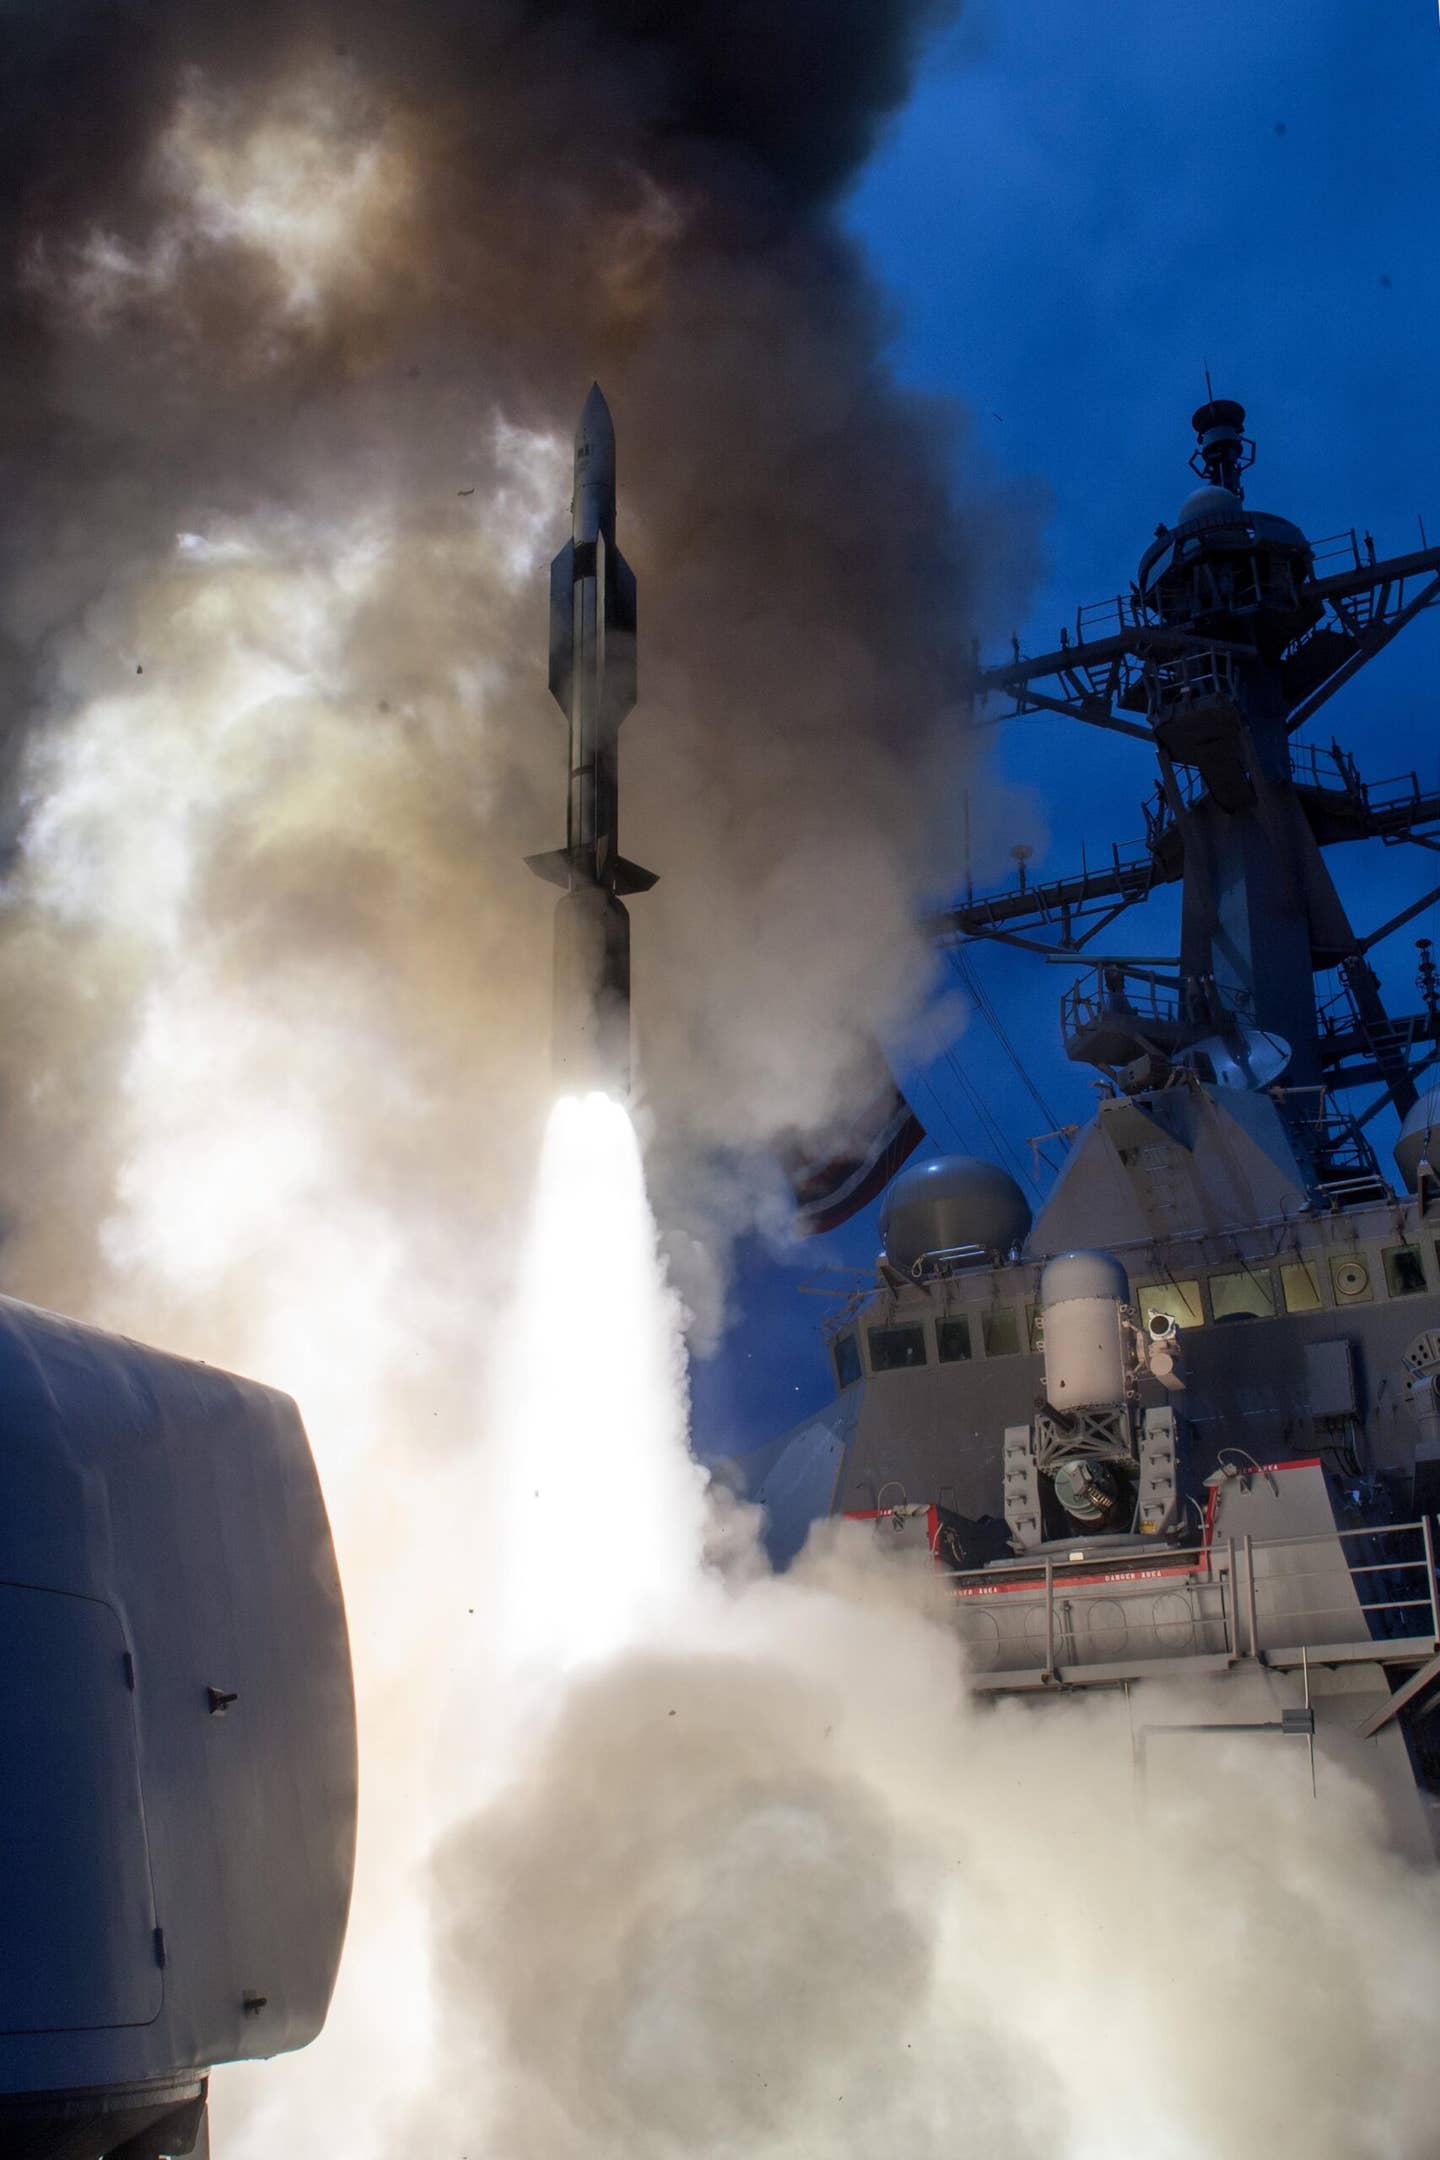 The <em>Arleigh Burke</em> class destroyer USS <em>John Paul Jones</em> (DDG-53) launches a Standard Missile 6 (SM-6) during an earlier live-fire test that took place in the Pacific in 2014. <em>U.S. Navy photo/Released</em>